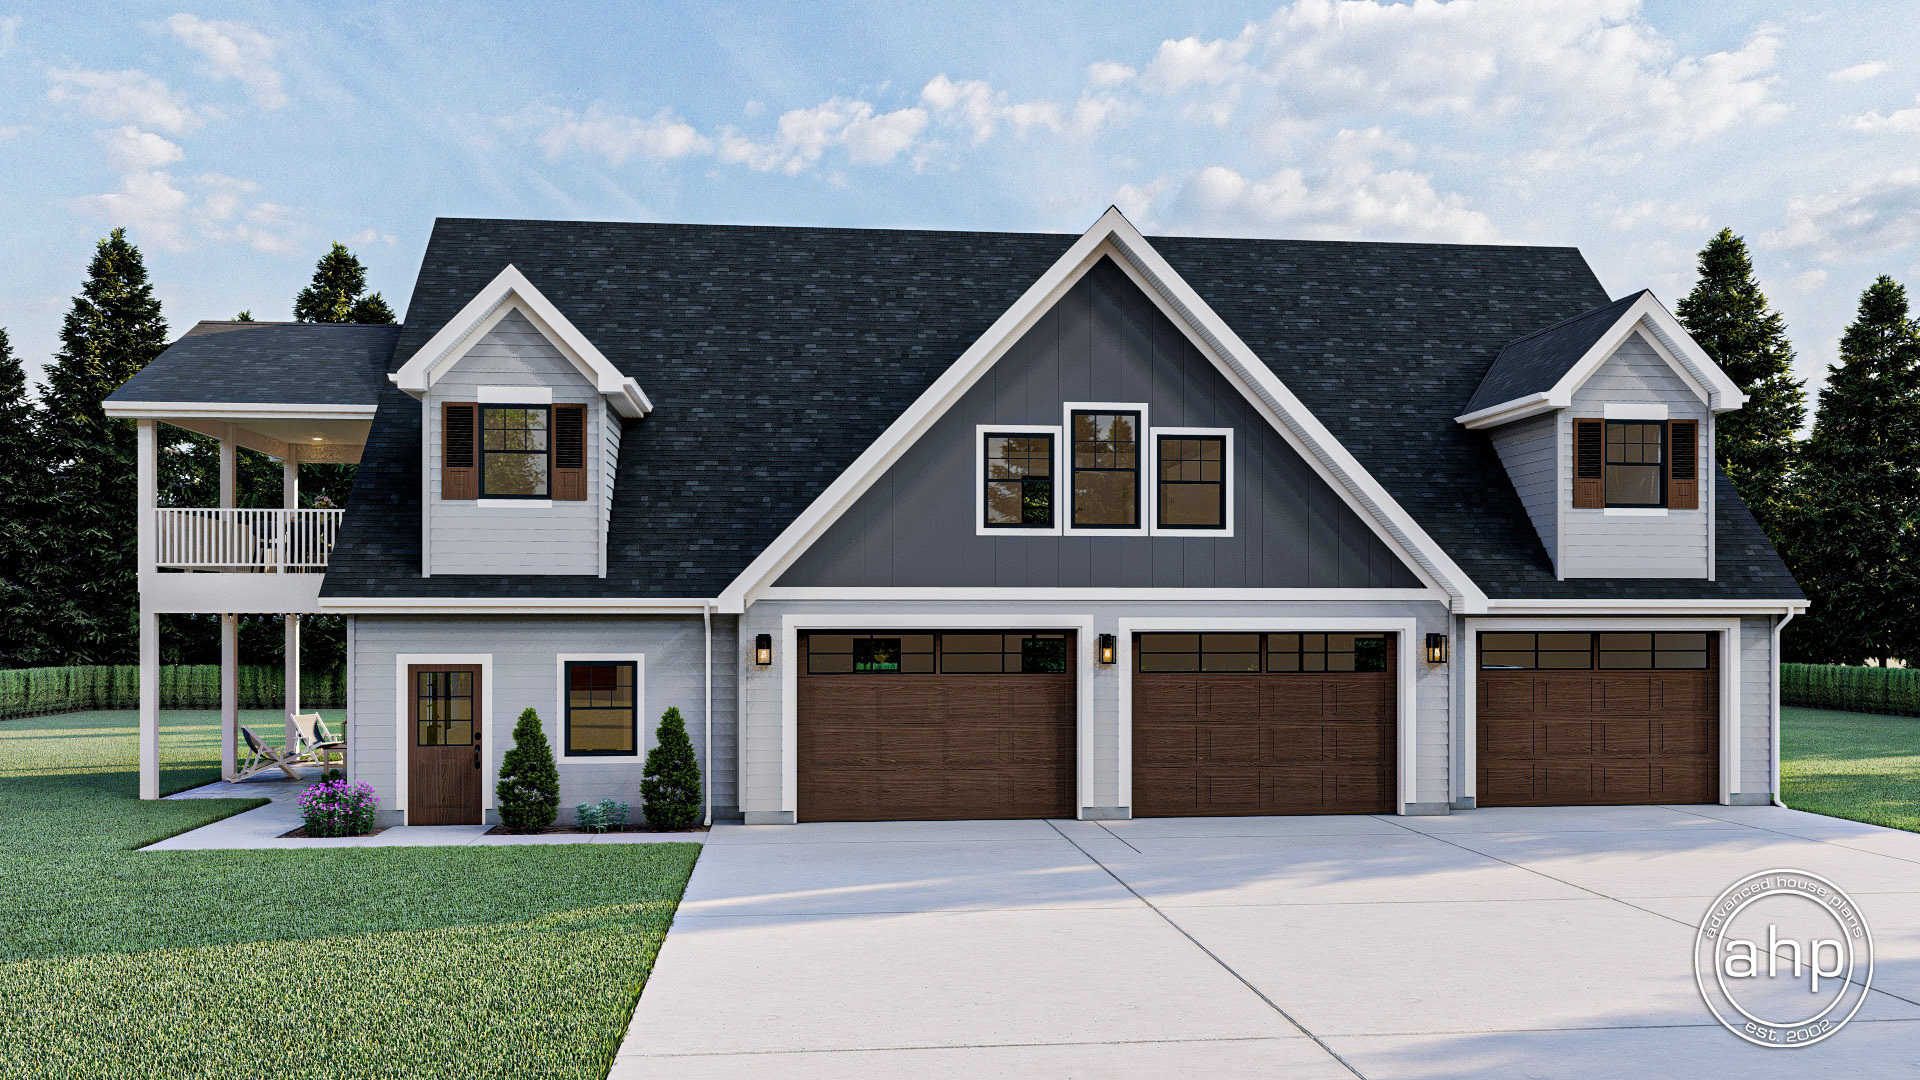 Traditional Style Carriage House Plan, How Much To Build A 3 Car Garage With Apartment Above